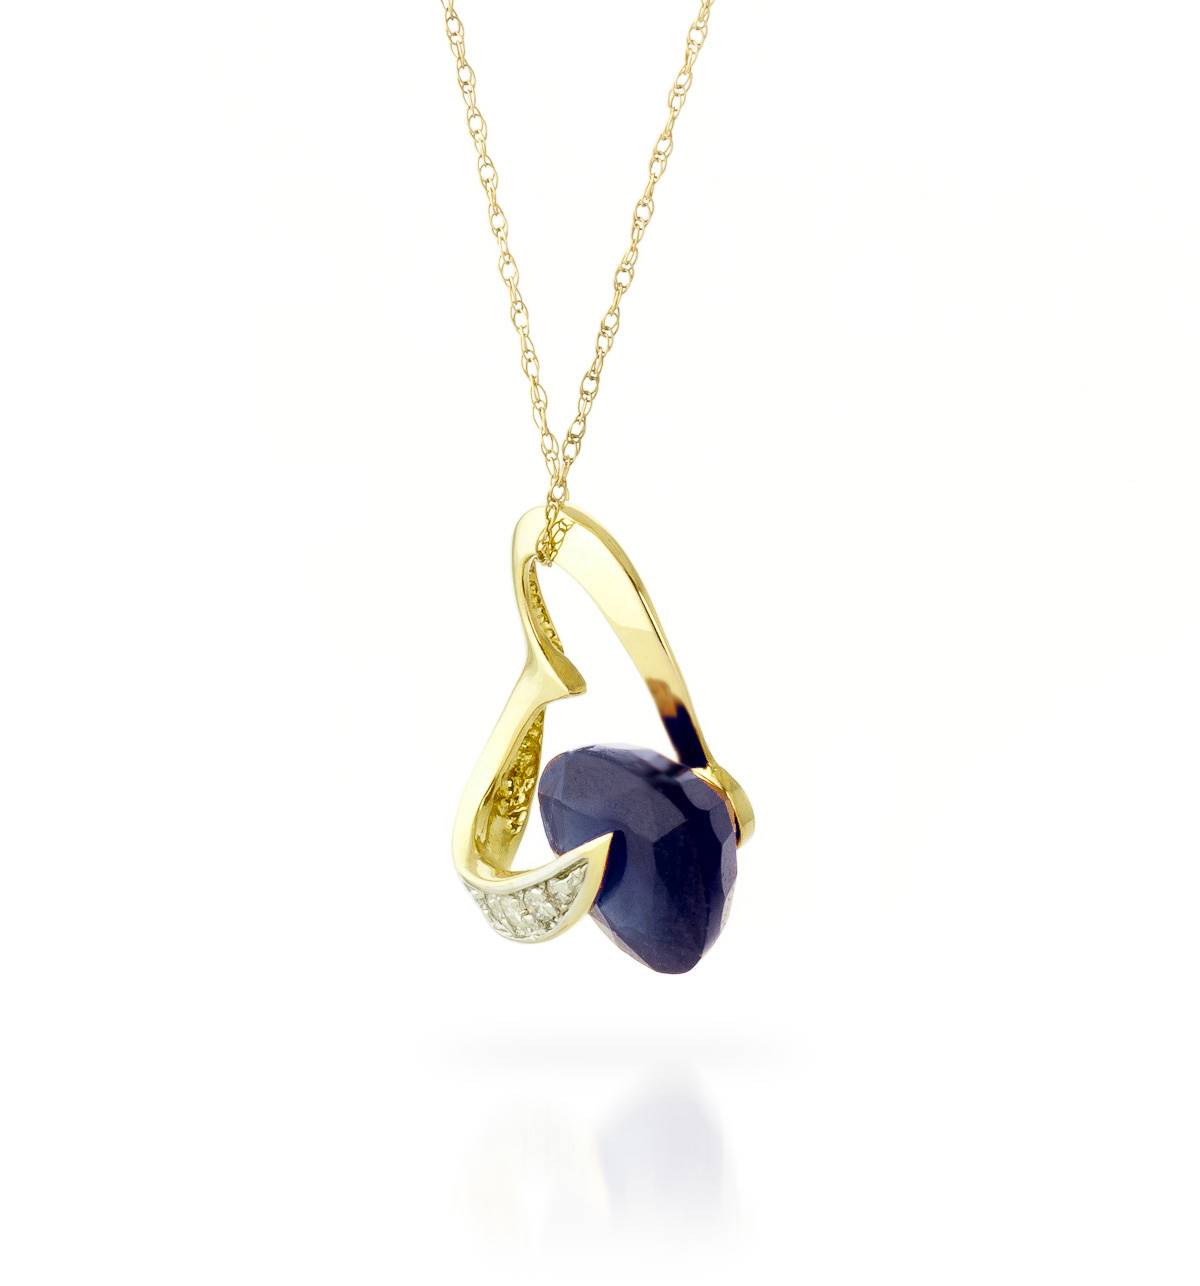 14K Solid Yellow Gold Heart Diamond & Sapphire Necklace